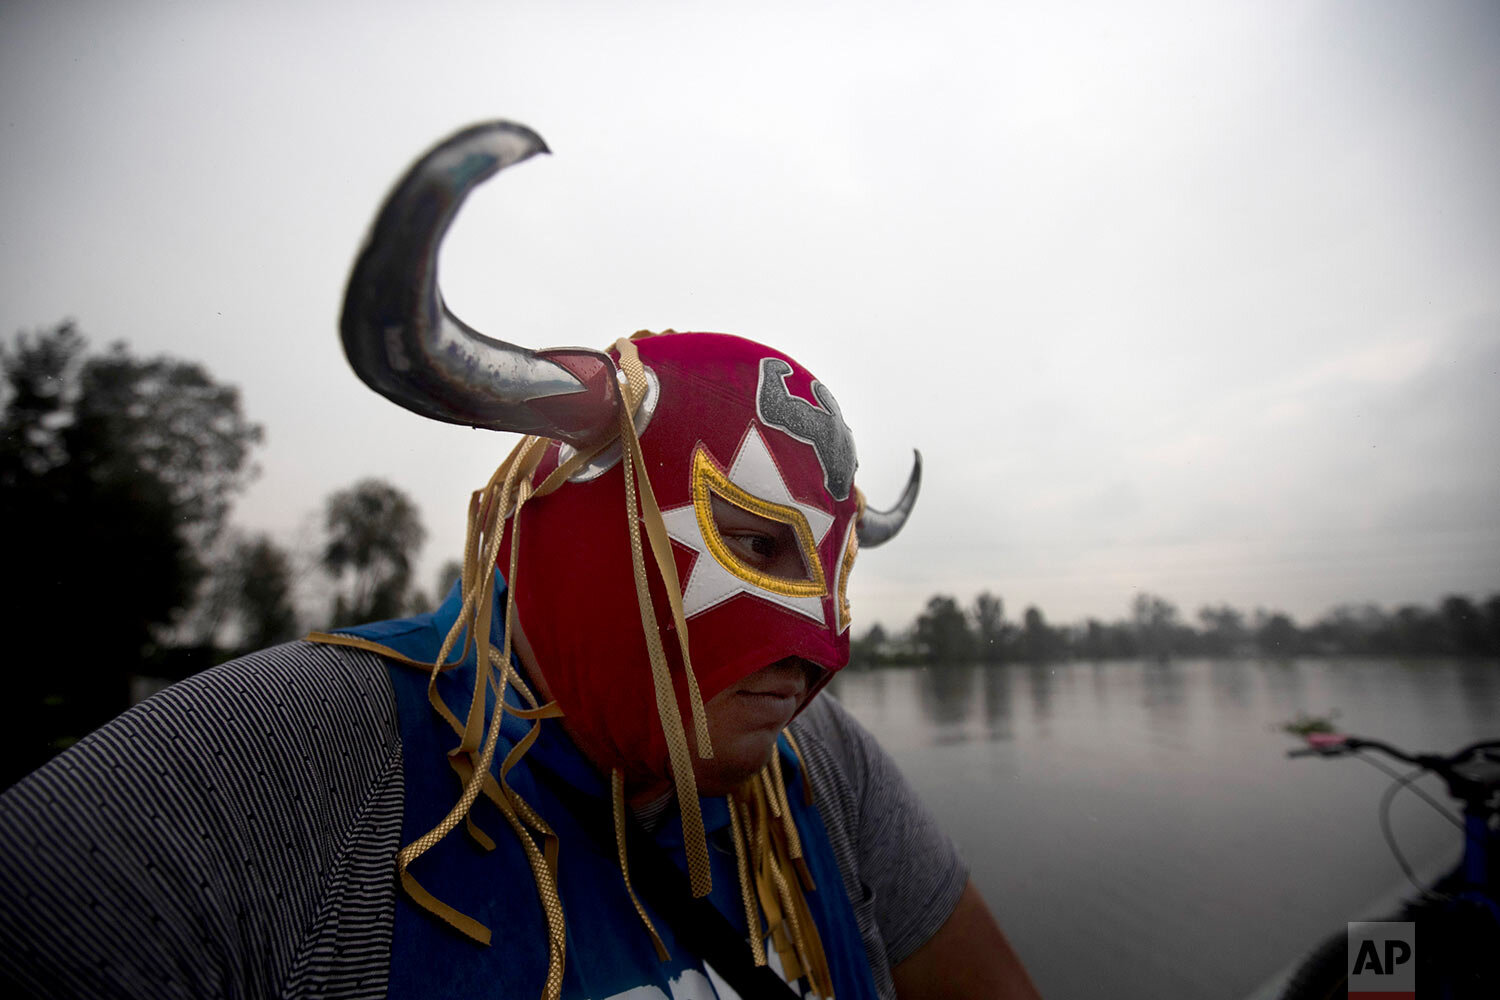  Masked Lucha Libre fighter Mister Jerry rides on a boat to train for what will be live streaming fights which wrestlers will charge for, in Xochimilco's famous floating gardens on the outskirts of Mexico City, Thursday, Aug. 20, 2020, amid the new c